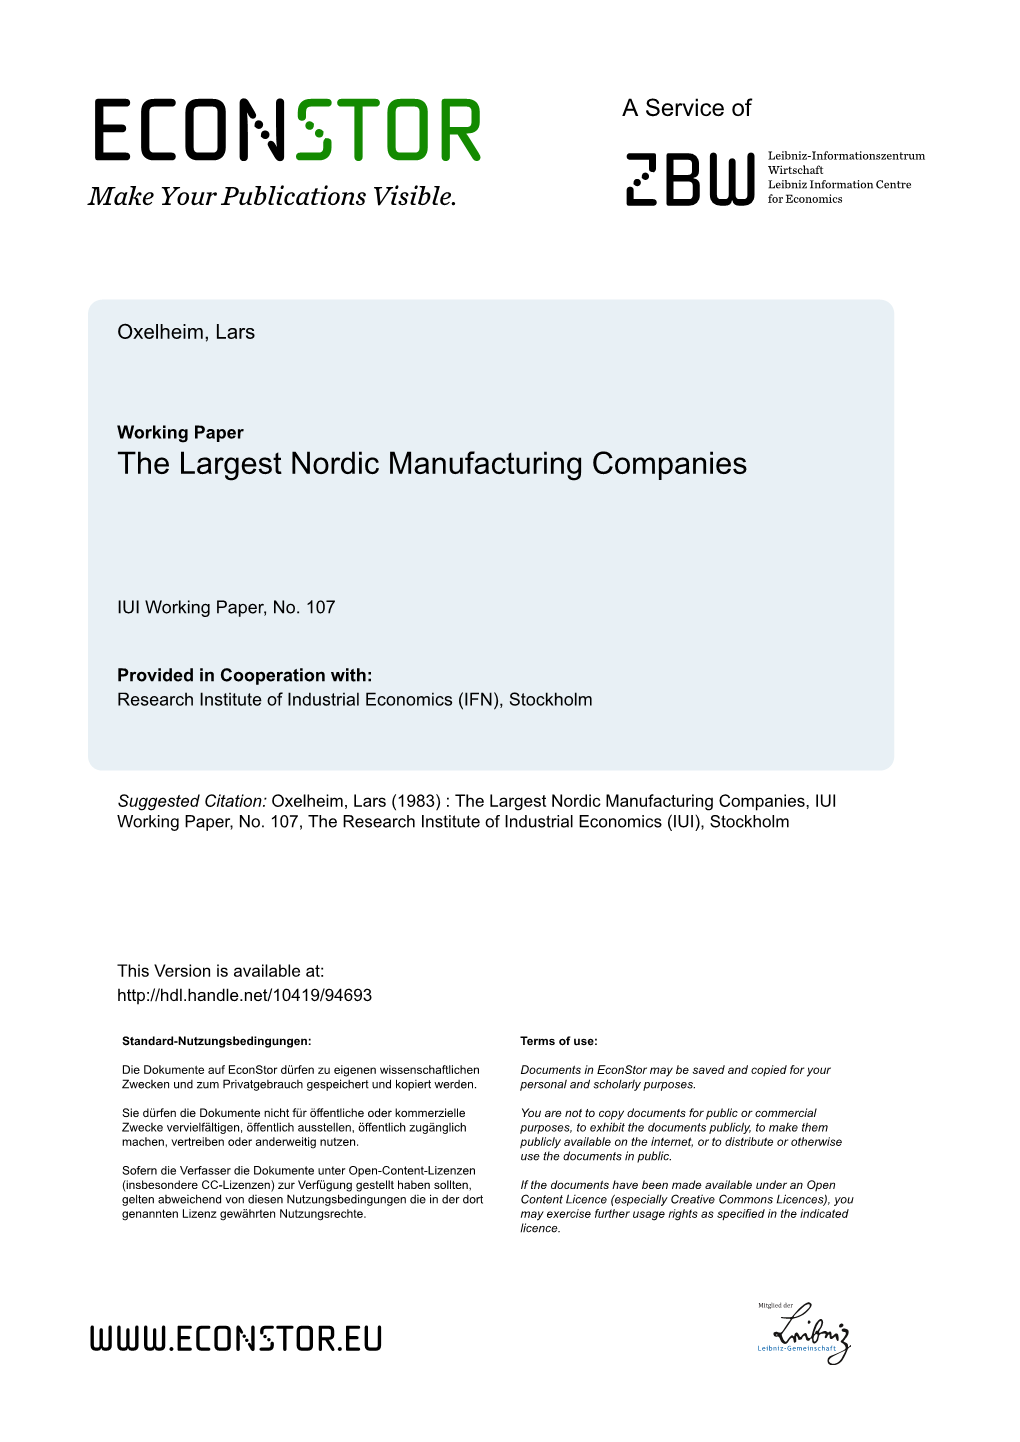 The Largest Nordic Manufacturing Companies